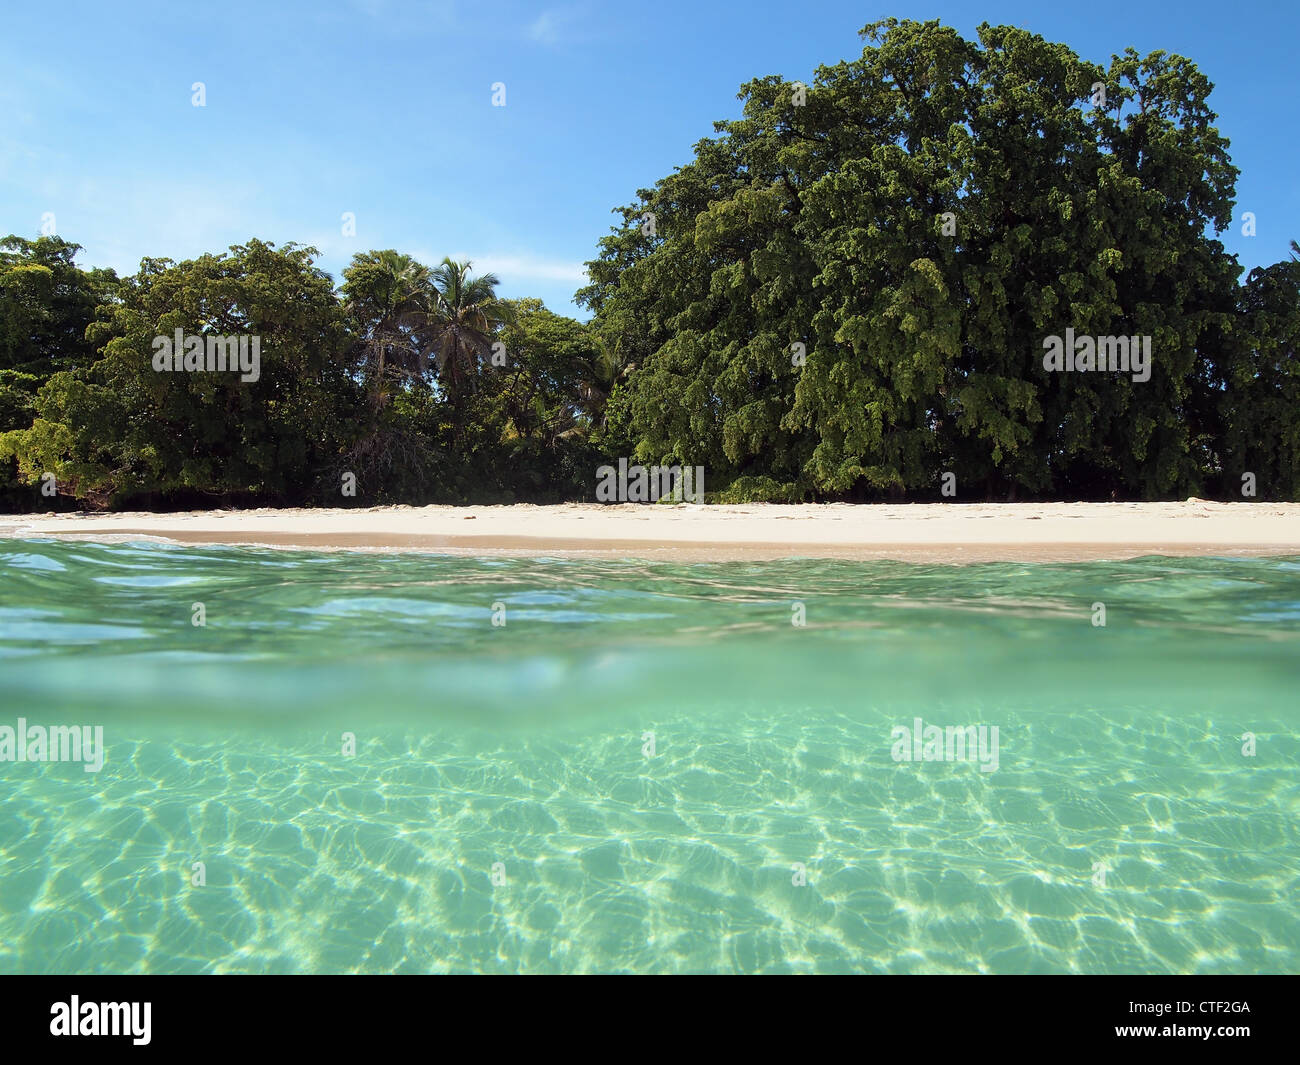 Sandy seashore over and under water of a tropical beach with lush tree, Central America, Panama Stock Photo